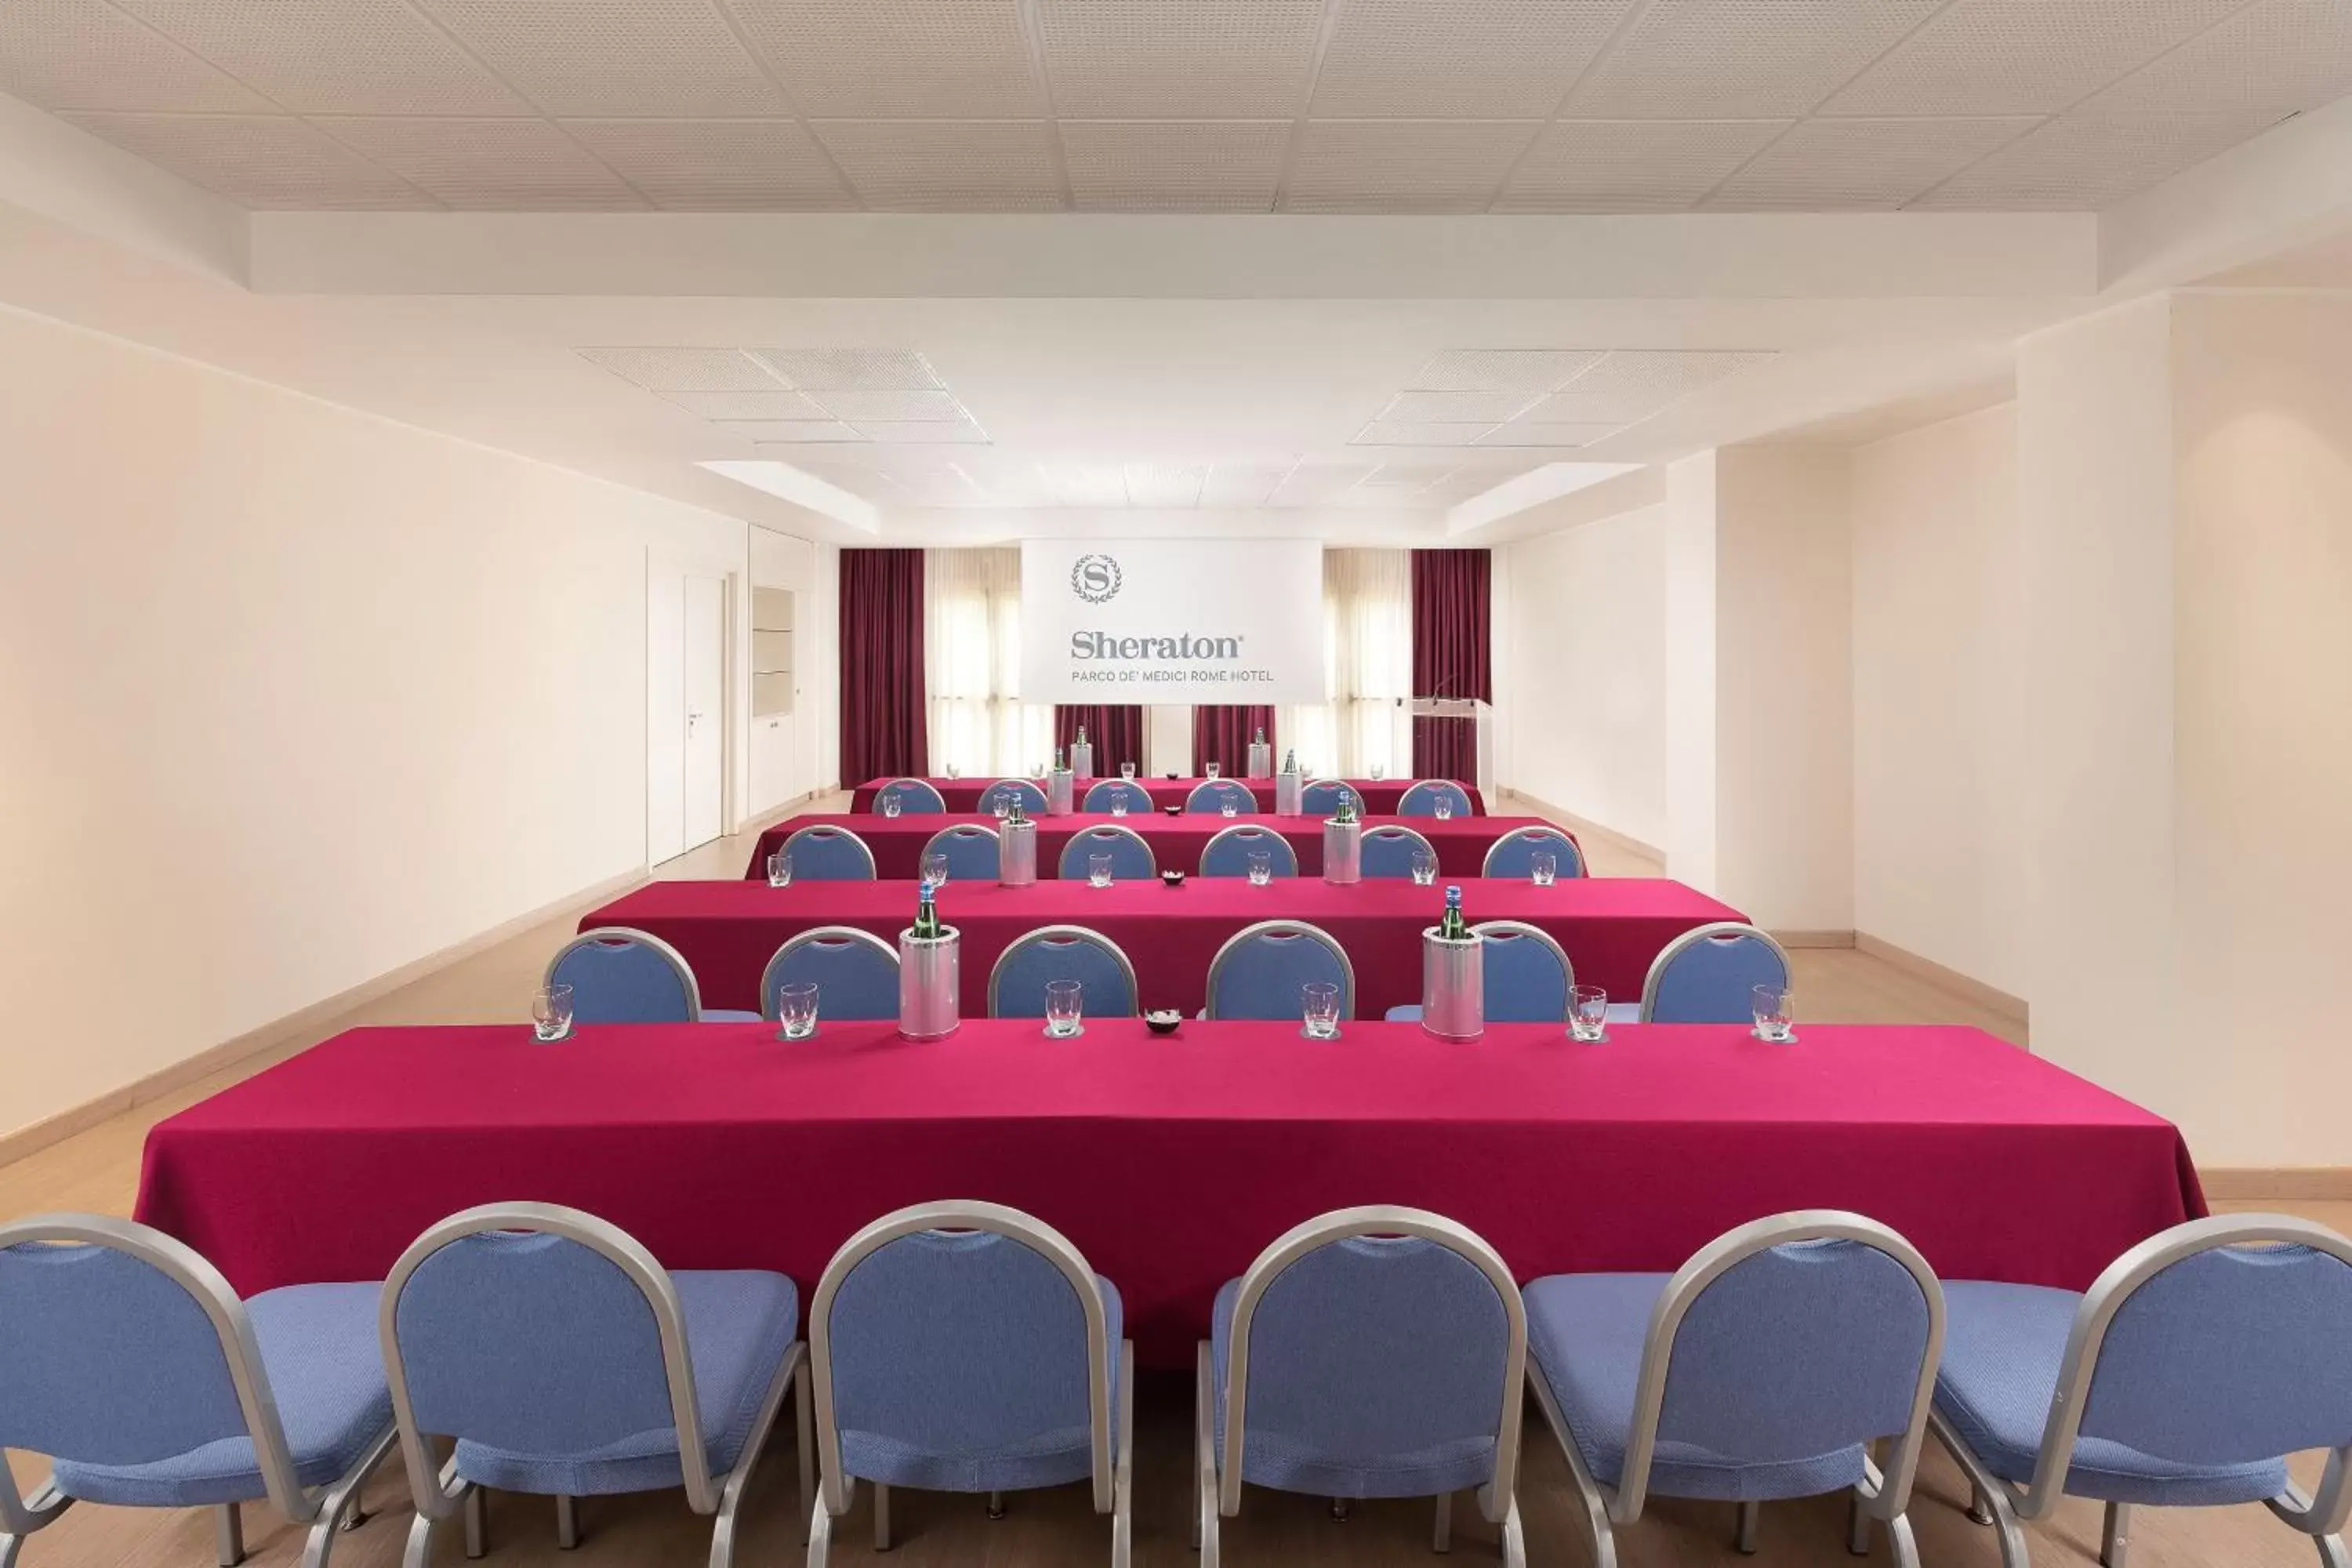 Meeting/conference room in Sheraton Rome Parco de Medici